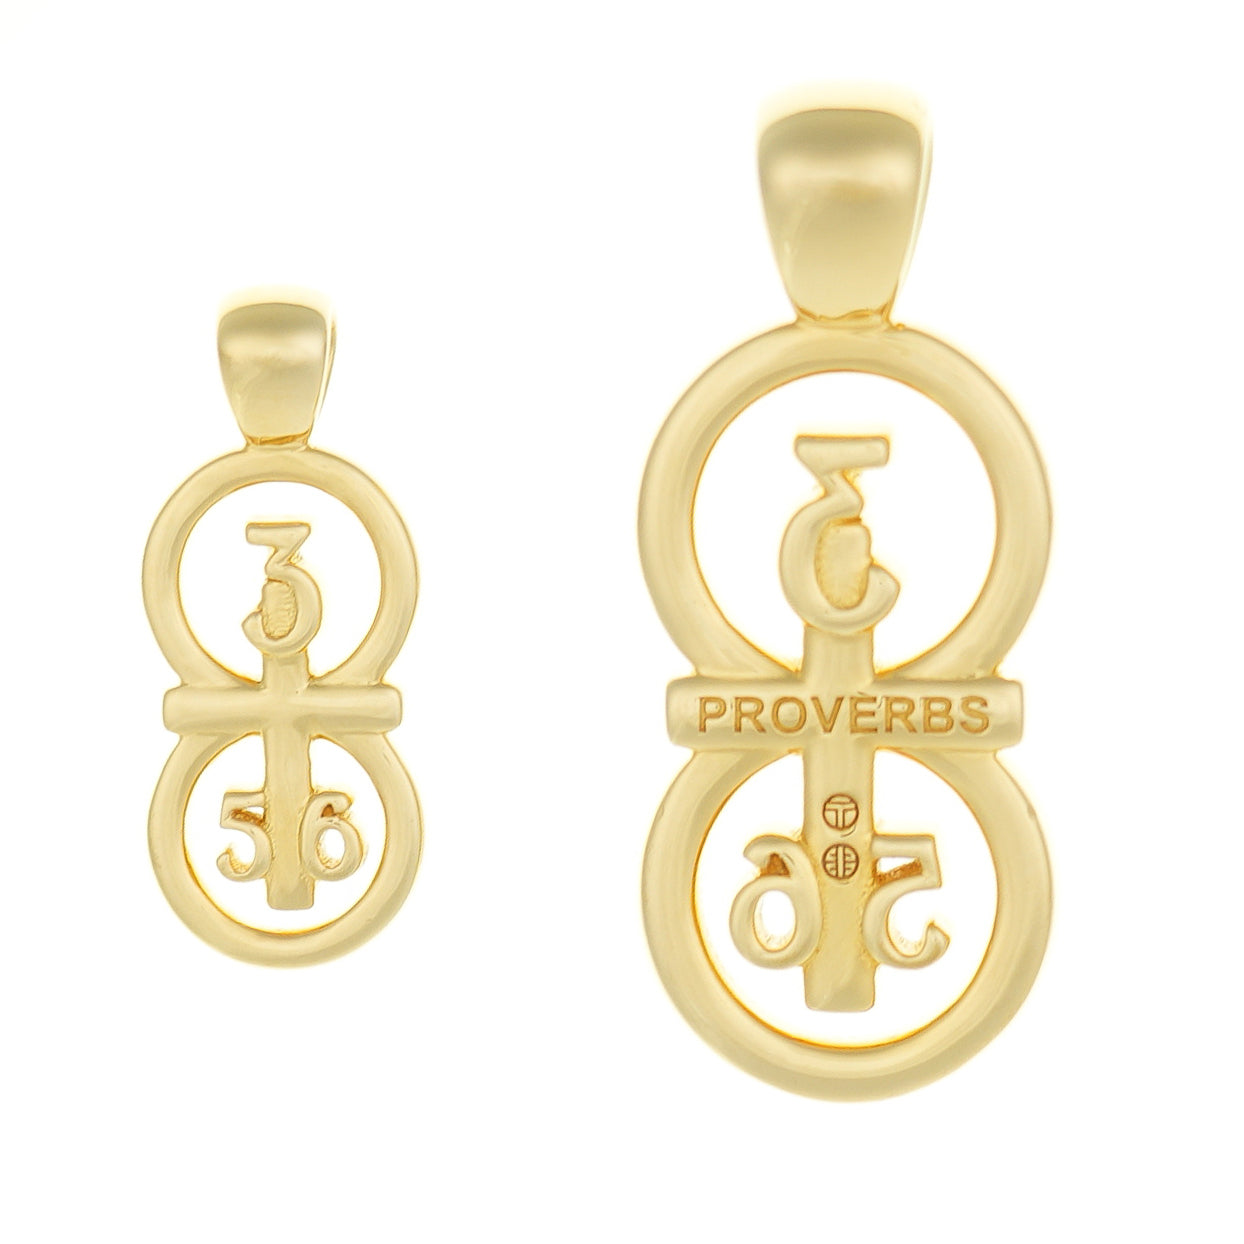 This image shows our small and large pendants side by side. This picture gives a good size comparison to each other. Our 29 and 11® pendant has the numbers 3, 5, and 6 intertwined with the cross to represent Proverbs 3:5-6 with the chapter word "Proverbs" inscribed on the back.